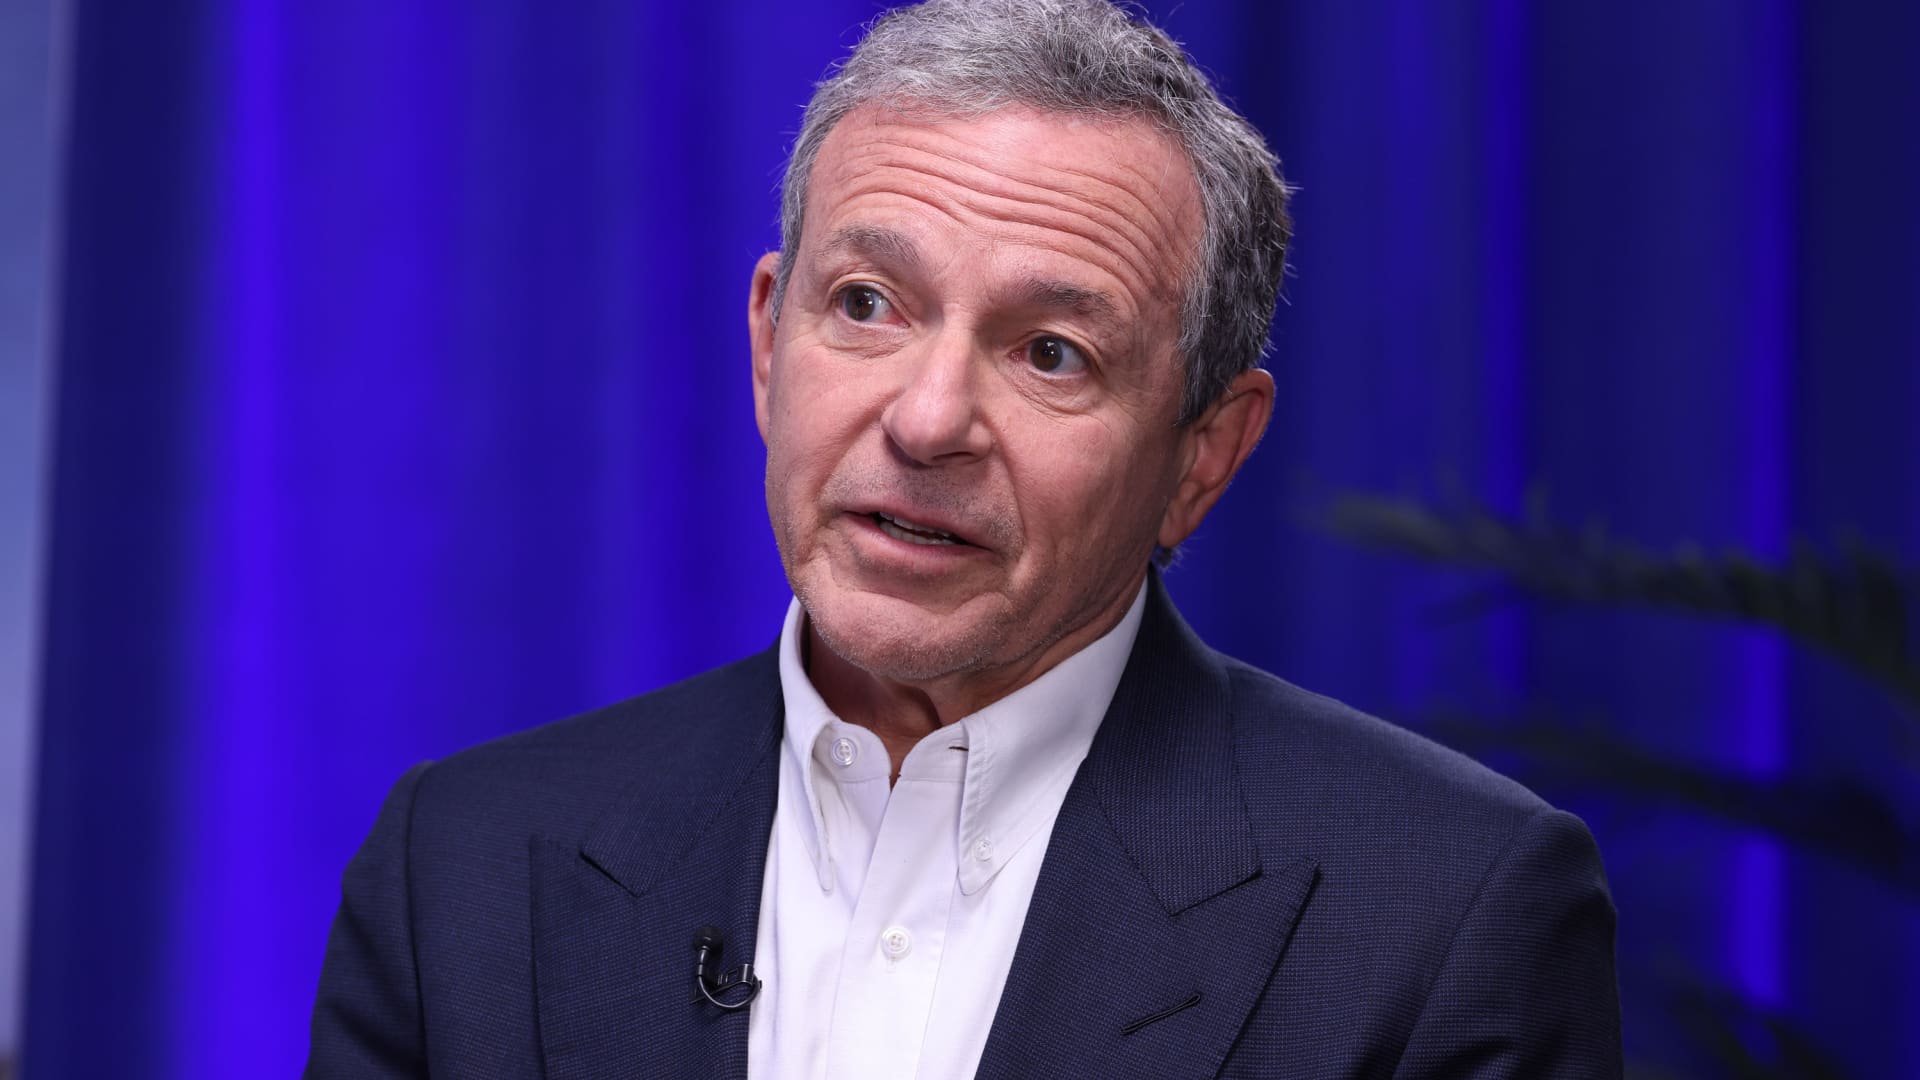 Disney CEO Bob Iger’s potential willingness to sell Hulu is a reversal in strategy